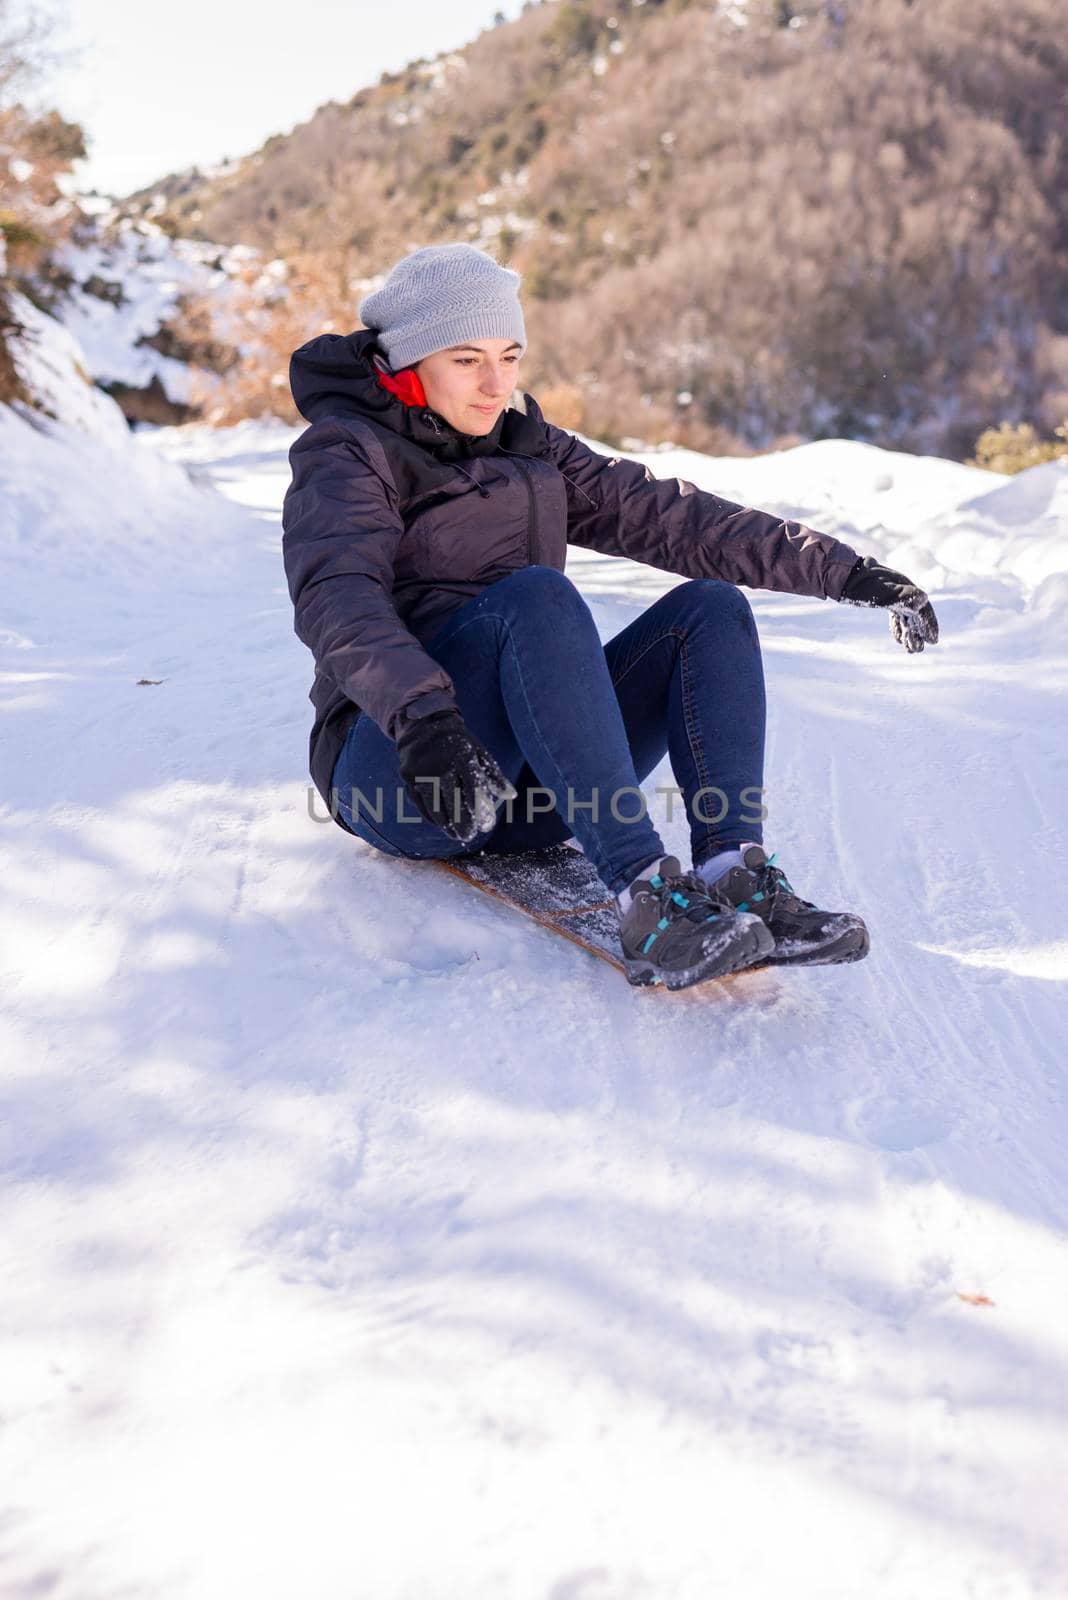 portrait of pretty young woman sliding down hill on snow saucer sled outdoors in winter. by raferto1973